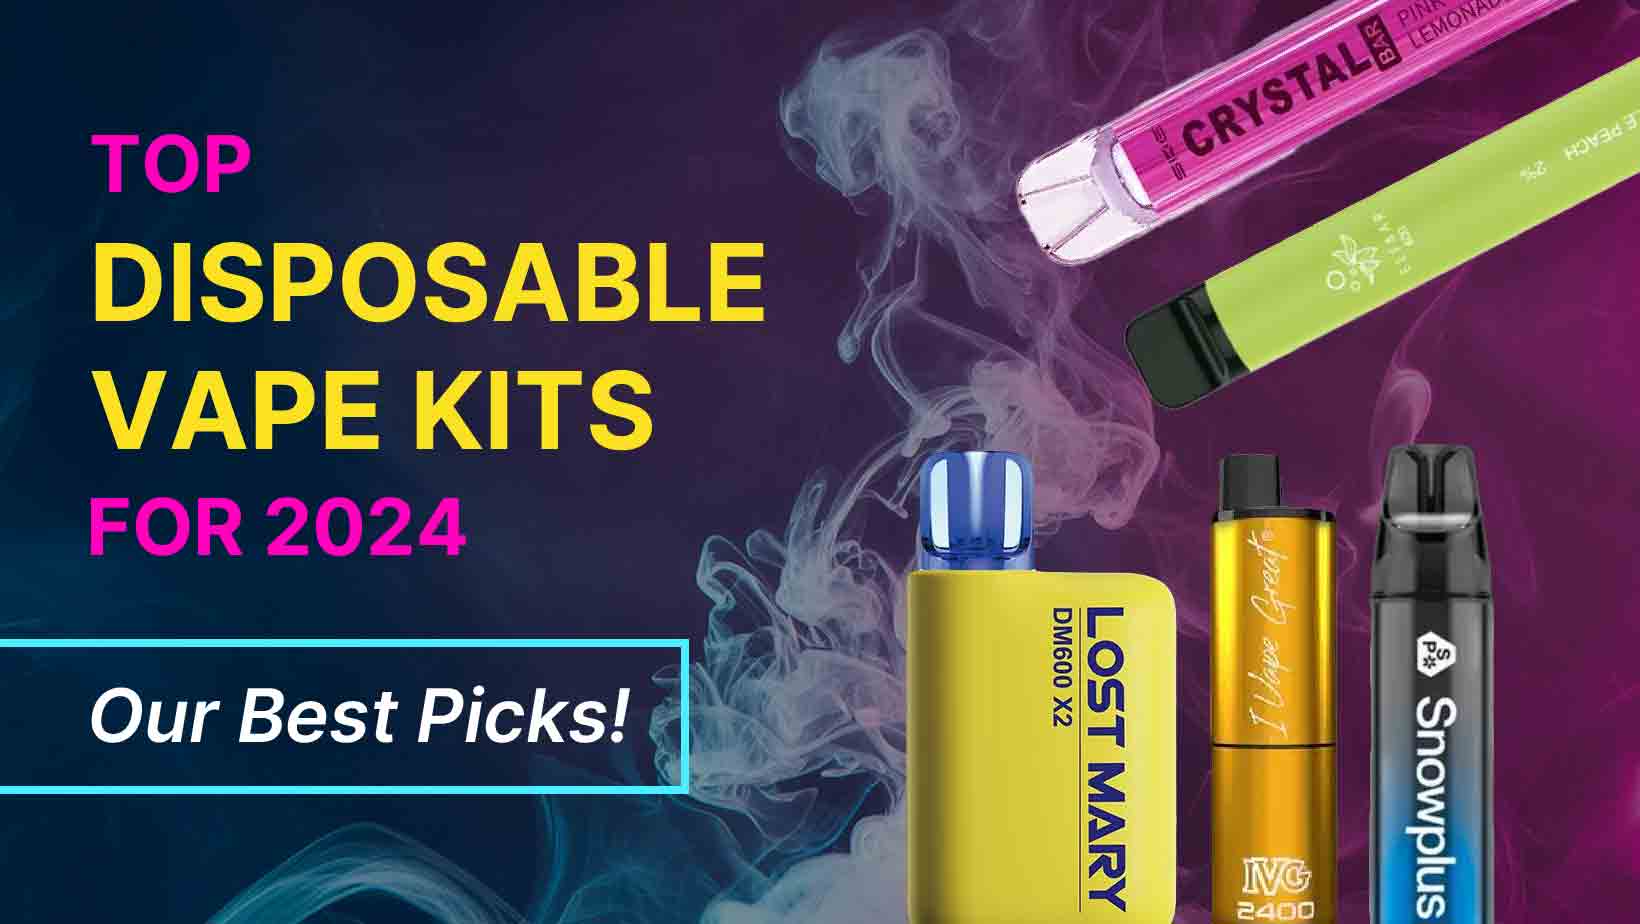 Top-Disposable-Vape-Kits-for-2024-Our-Best-Picks